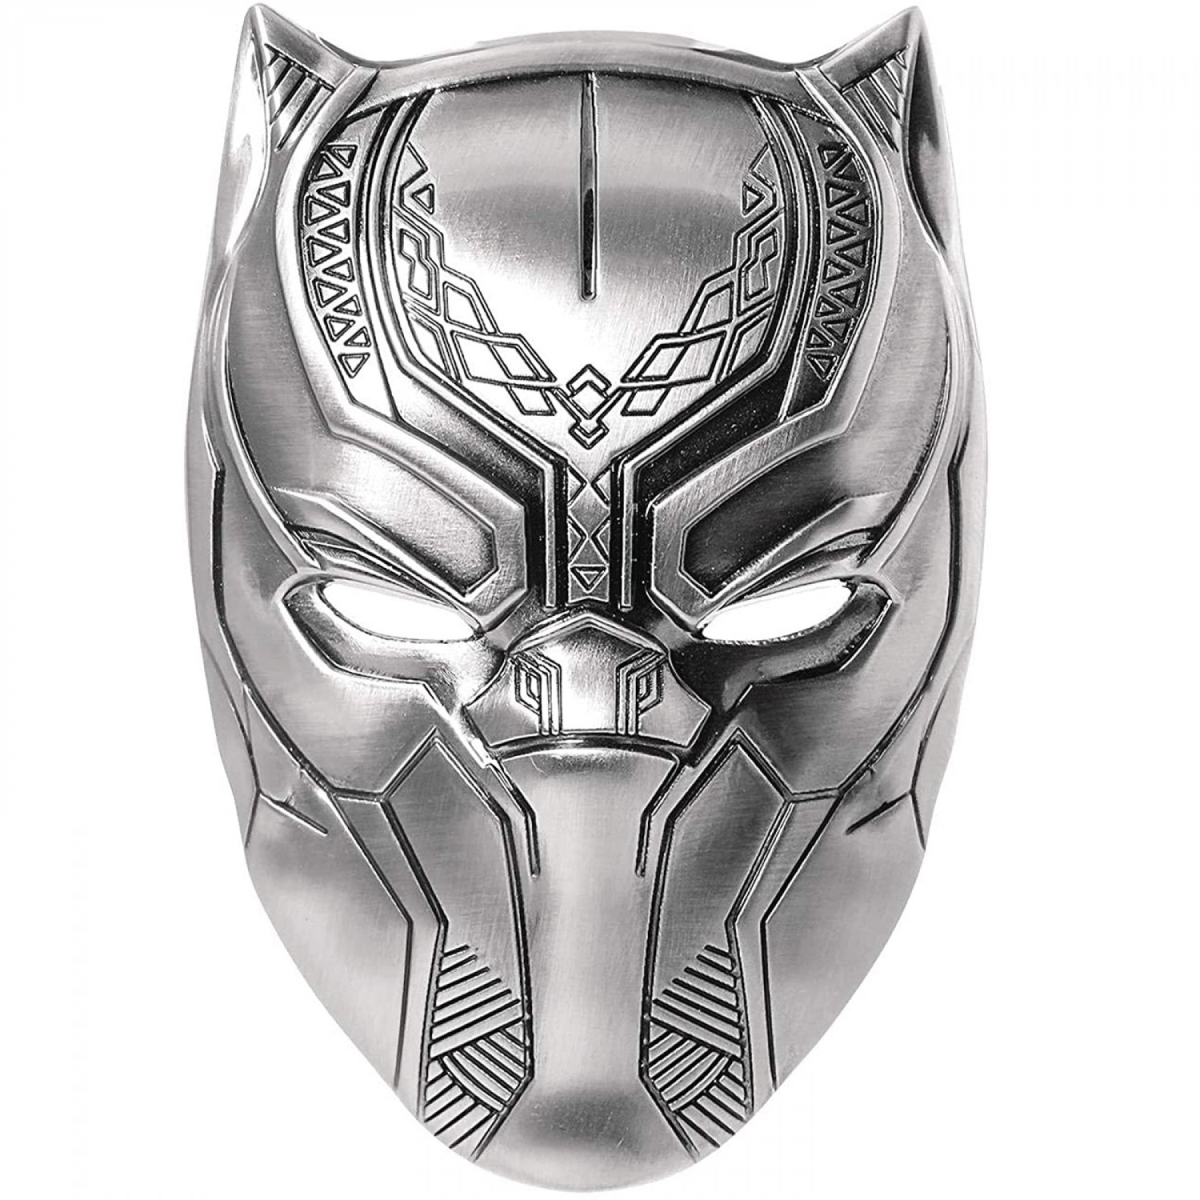 Picture of Black Panther 826303 Marvel Black Panther Helmet Pewter Lapel Pin